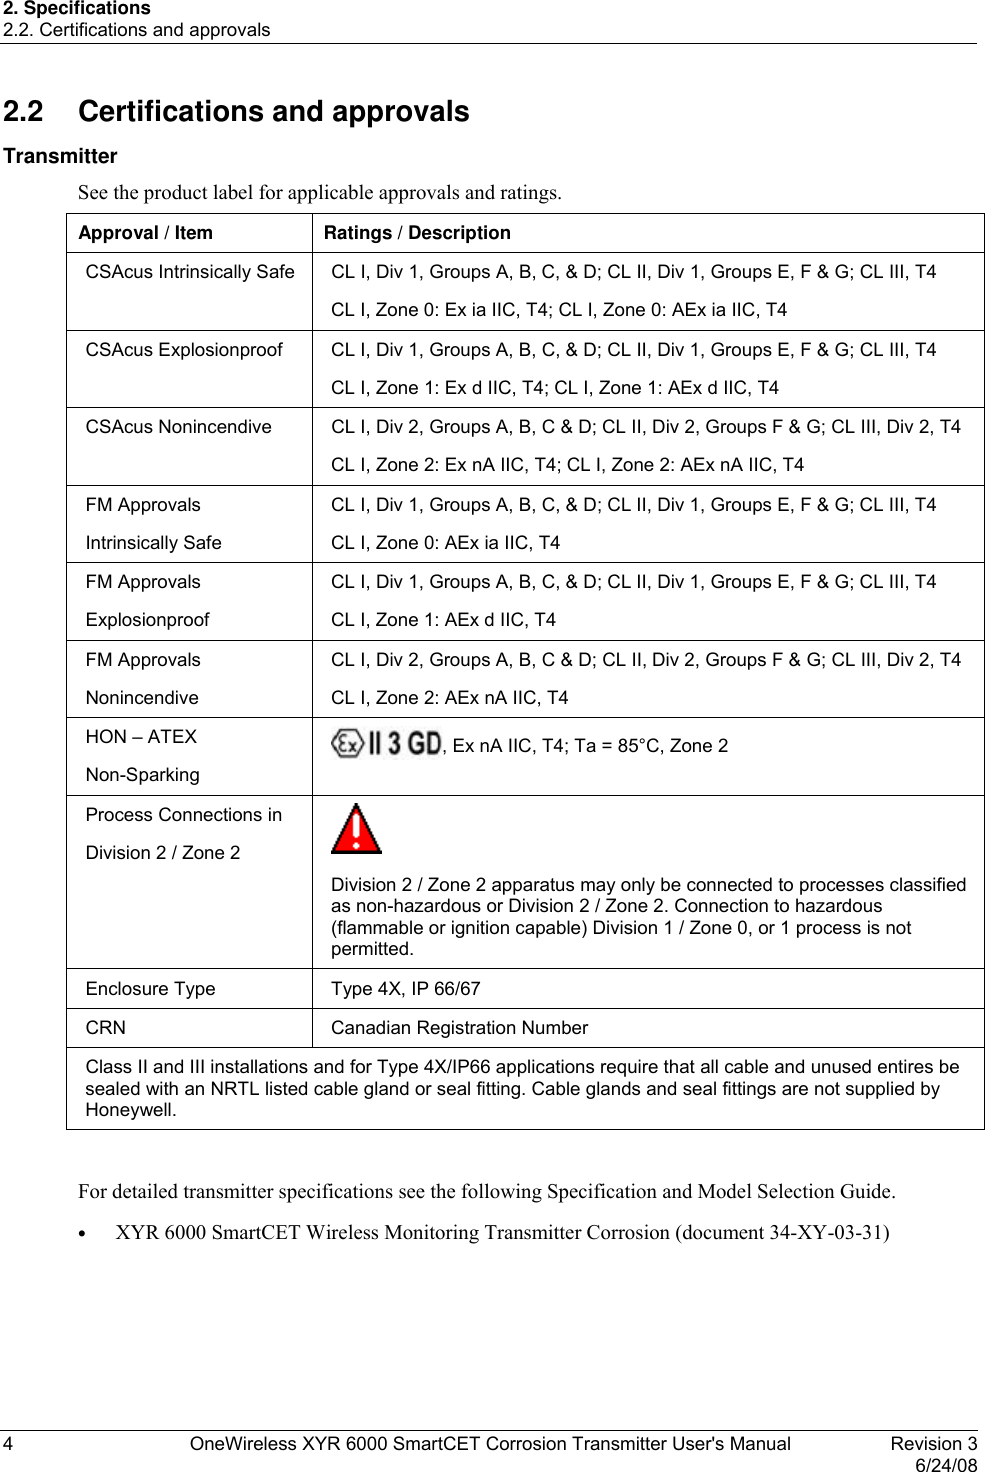 2. Specifications 2.2. Certifications and approvals 4  OneWireless XYR 6000 SmartCET Corrosion Transmitter User&apos;s Manual   Revision 3   6/24/08 2.2  Certifications and approvals Transmitter See the product label for applicable approvals and ratings. Approval / Item  Ratings / Description CSAcus Intrinsically Safe  CL I, Div 1, Groups A, B, C, &amp; D; CL II, Div 1, Groups E, F &amp; G; CL III, T4 CL I, Zone 0: Ex ia IIC, T4; CL I, Zone 0: AEx ia IIC, T4  CSAcus Explosionproof  CL I, Div 1, Groups A, B, C, &amp; D; CL II, Div 1, Groups E, F &amp; G; CL III, T4 CL I, Zone 1: Ex d IIC, T4; CL I, Zone 1: AEx d IIC, T4 CSAcus Nonincendive  CL I, Div 2, Groups A, B, C &amp; D; CL II, Div 2, Groups F &amp; G; CL III, Div 2, T4 CL I, Zone 2: Ex nA IIC, T4; CL I, Zone 2: AEx nA IIC, T4 FM Approvals Intrinsically Safe CL I, Div 1, Groups A, B, C, &amp; D; CL II, Div 1, Groups E, F &amp; G; CL III, T4 CL I, Zone 0: AEx ia IIC, T4  FM Approvals Explosionproof CL I, Div 1, Groups A, B, C, &amp; D; CL II, Div 1, Groups E, F &amp; G; CL III, T4 CL I, Zone 1: AEx d IIC, T4 FM Approvals Nonincendive CL I, Div 2, Groups A, B, C &amp; D; CL II, Div 2, Groups F &amp; G; CL III, Div 2, T4 CL I, Zone 2: AEx nA IIC, T4 HON – ATEX Non-Sparking , Ex nA IIC, T4; Ta = 85°C, Zone 2 Process Connections in Division 2 / Zone 2    Division 2 / Zone 2 apparatus may only be connected to processes classified as non-hazardous or Division 2 / Zone 2. Connection to hazardous (flammable or ignition capable) Division 1 / Zone 0, or 1 process is not permitted. Enclosure Type  Type 4X, IP 66/67 CRN  Canadian Registration Number Class II and III installations and for Type 4X/IP66 applications require that all cable and unused entires be sealed with an NRTL listed cable gland or seal fitting. Cable glands and seal fittings are not supplied by Honeywell.  For detailed transmitter specifications see the following Specification and Model Selection Guide. •  XYR 6000 SmartCET Wireless Monitoring Transmitter Corrosion (document 34-XY-03-31)  